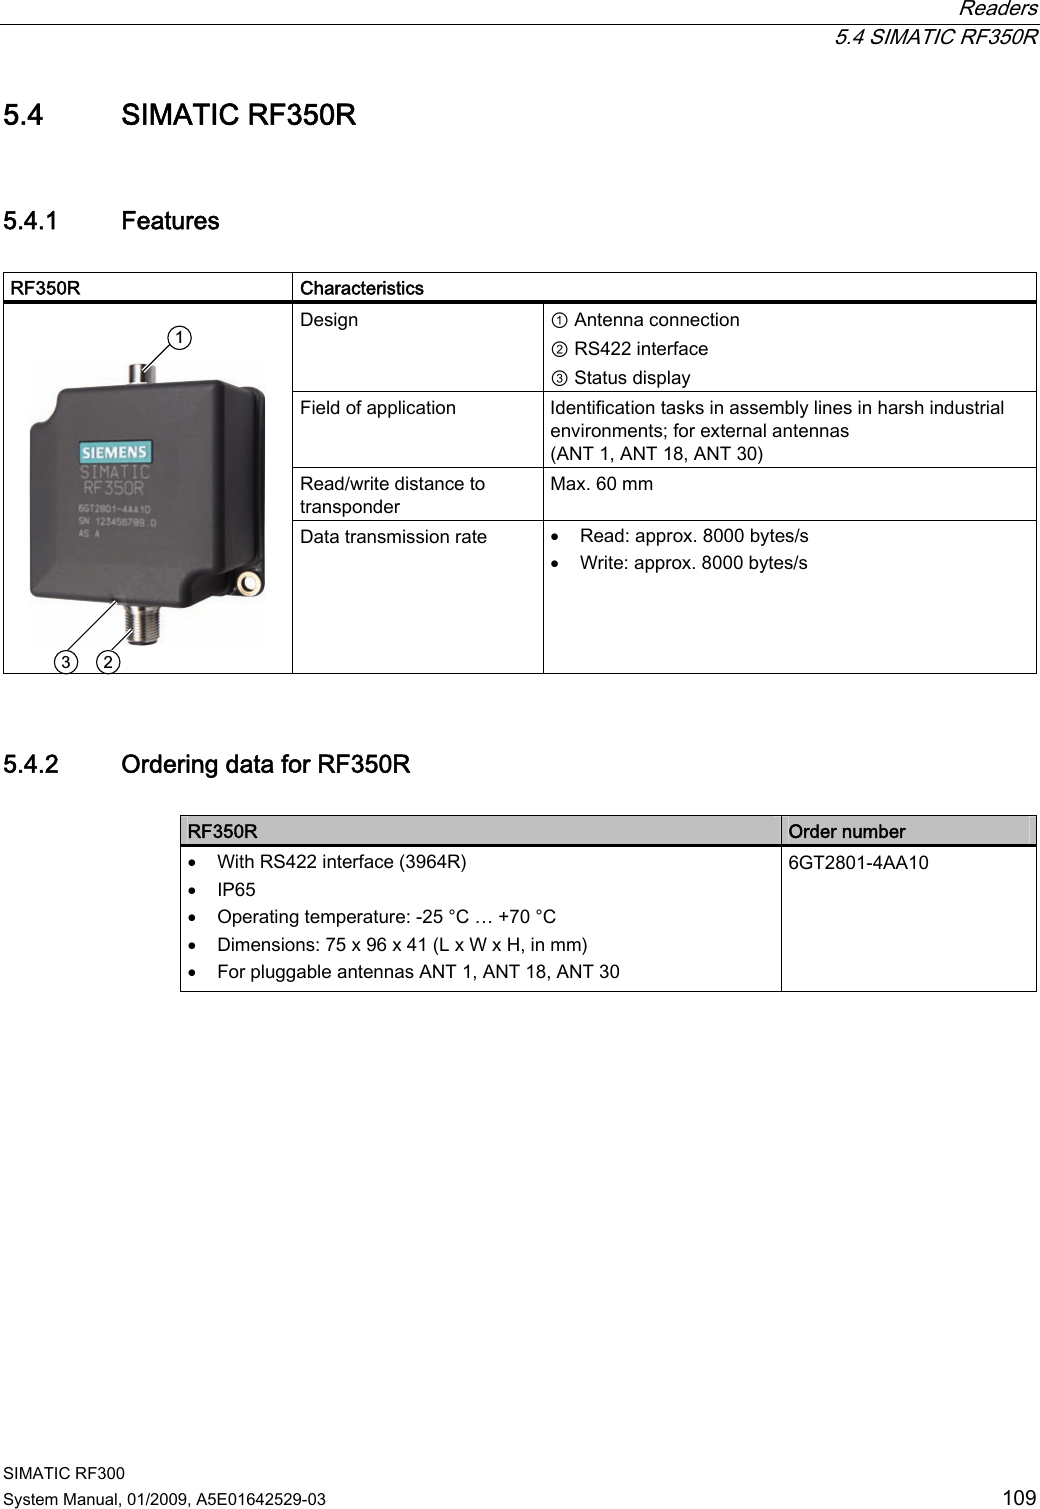  Readers  5.4 SIMATIC RF350R SIMATIC RF300 System Manual, 01/2009, A5E01642529-03  109 5.4 SIMATIC RF350R 5.4.1 Features  RF350R     Characteristics Design  ① Antenna connection  ② RS422 interface ③ Status display Field of application  Identification tasks in assembly lines in harsh industrial environments; for external antennas (ANT 1, ANT 18, ANT 30) Read/write distance to transponder Max. 60 mm   Data transmission rate  • Read: approx. 8000 bytes/s • Write: approx. 8000 bytes/s 5.4.2 Ordering data for RF350R  RF350R  Order number • With RS422 interface (3964R) • IP65 • Operating temperature: -25 °C … +70 °C • Dimensions: 75 x 96 x 41 (L x W x H, in mm) • For pluggable antennas ANT 1, ANT 18, ANT 30 6GT2801-4AA10 